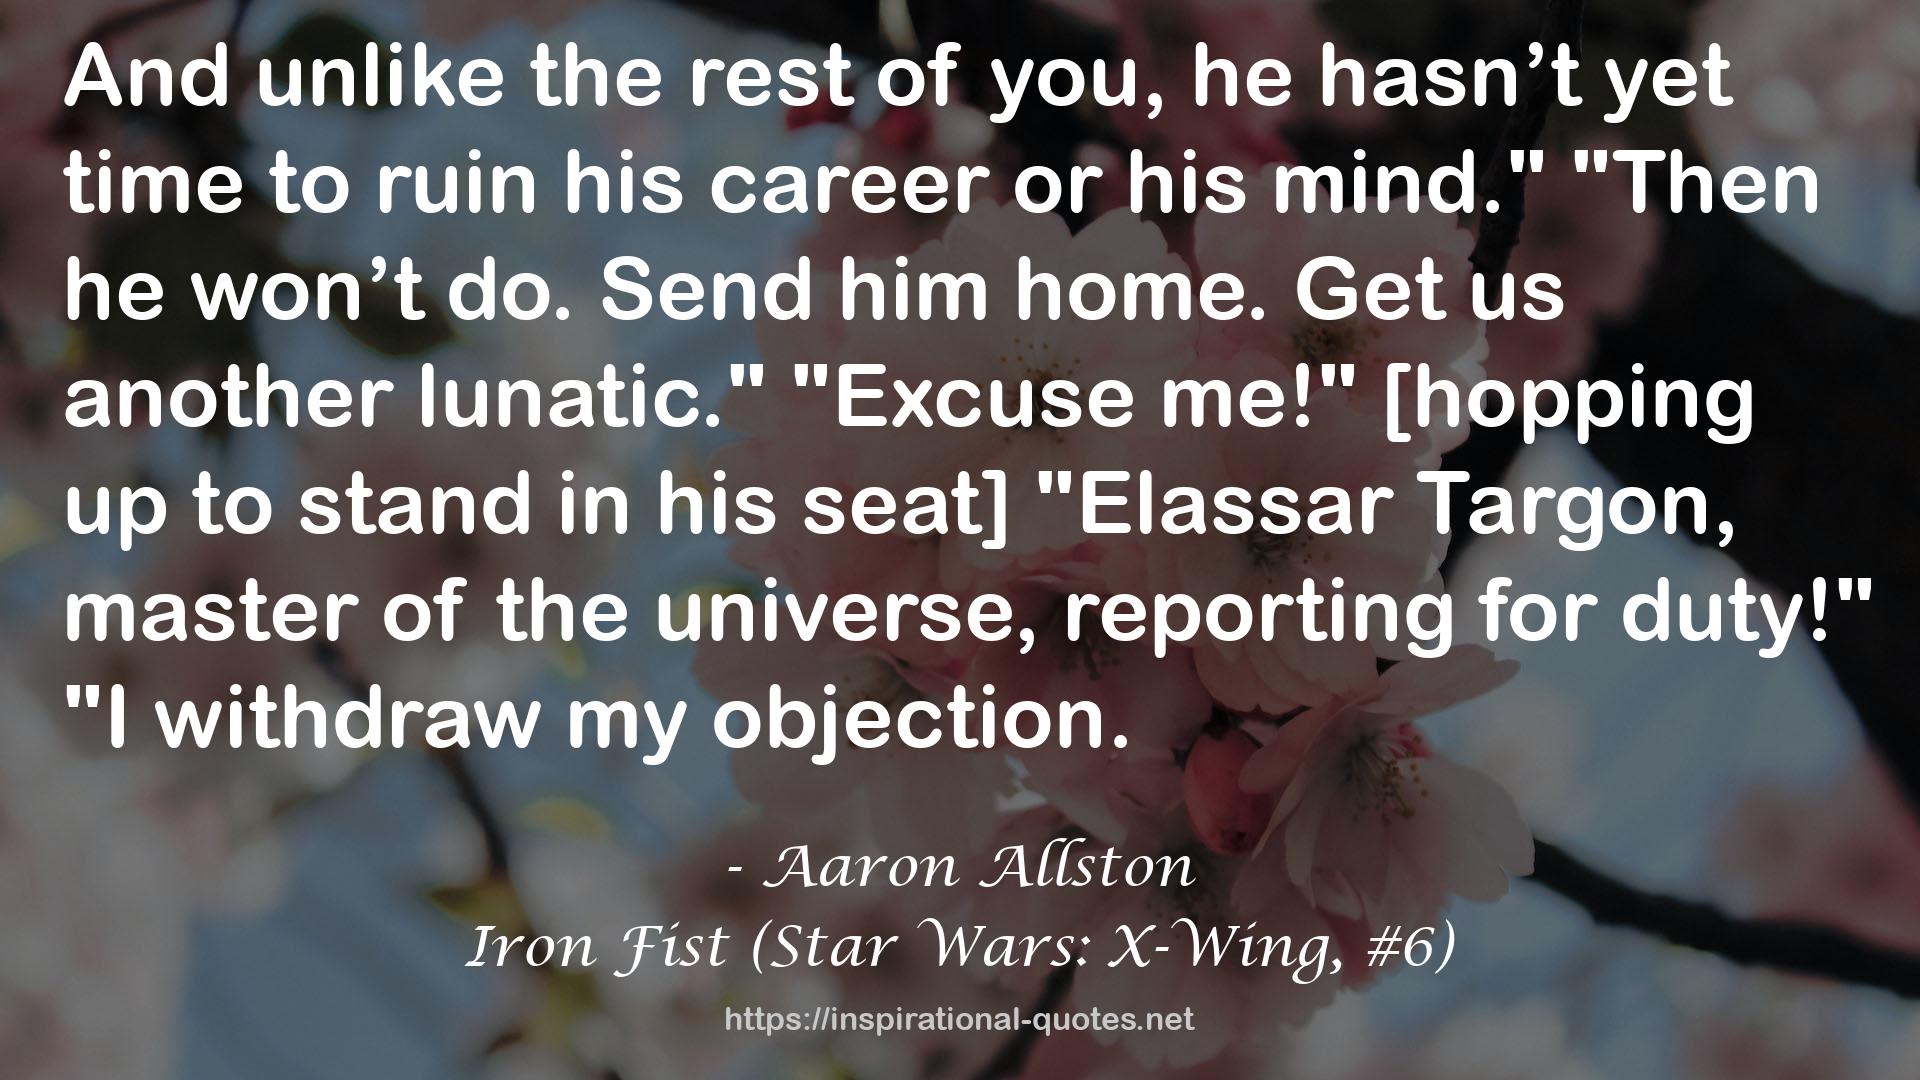 Iron Fist (Star Wars: X-Wing, #6) QUOTES